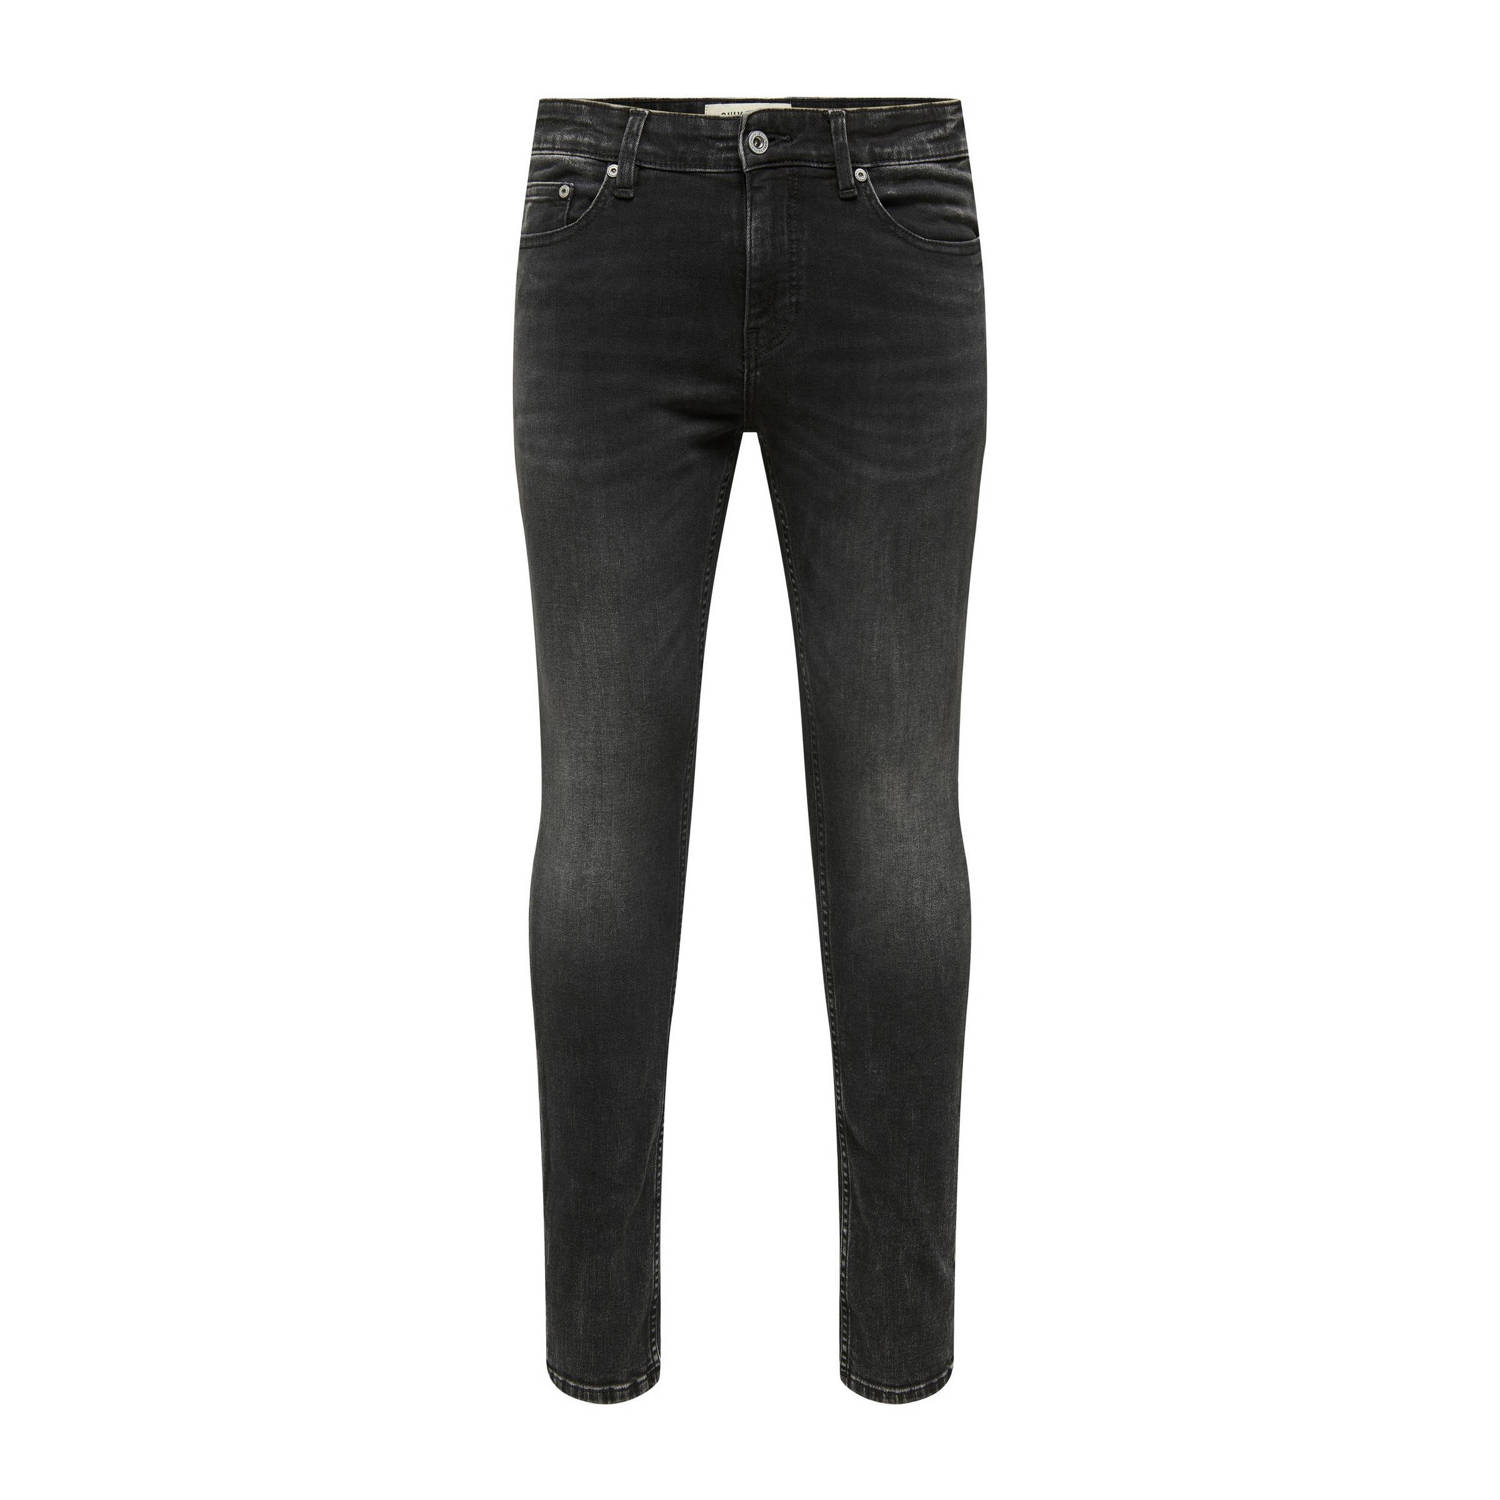 ONLY & SONS skinny jeans ONSWARP 9095 washed black